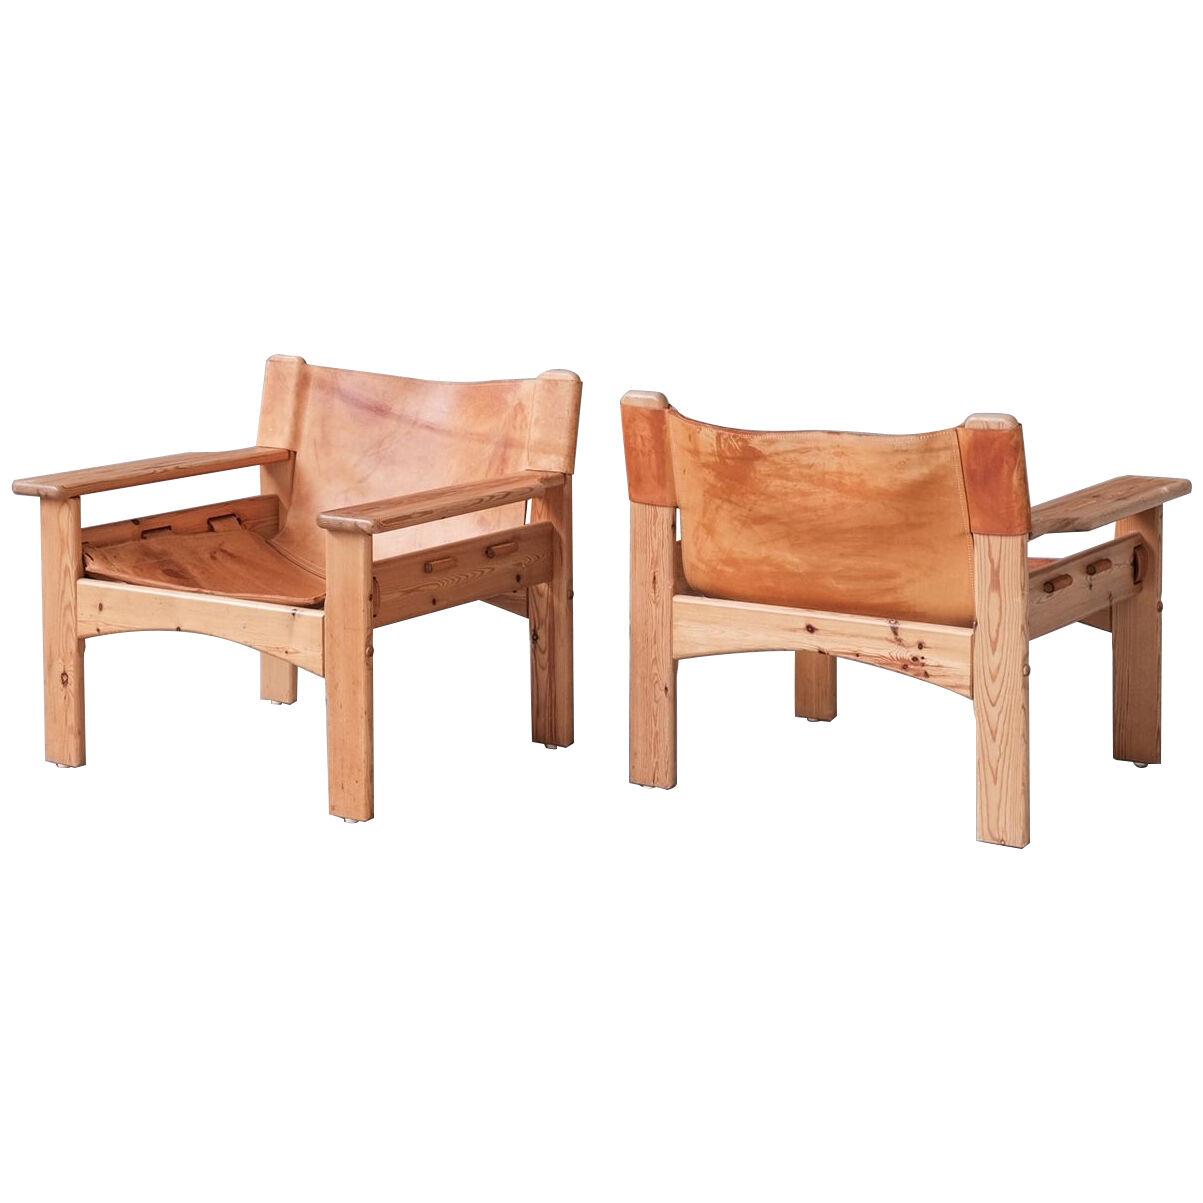 Pair of Pine and Leather Danish Mid-Century Armchairs